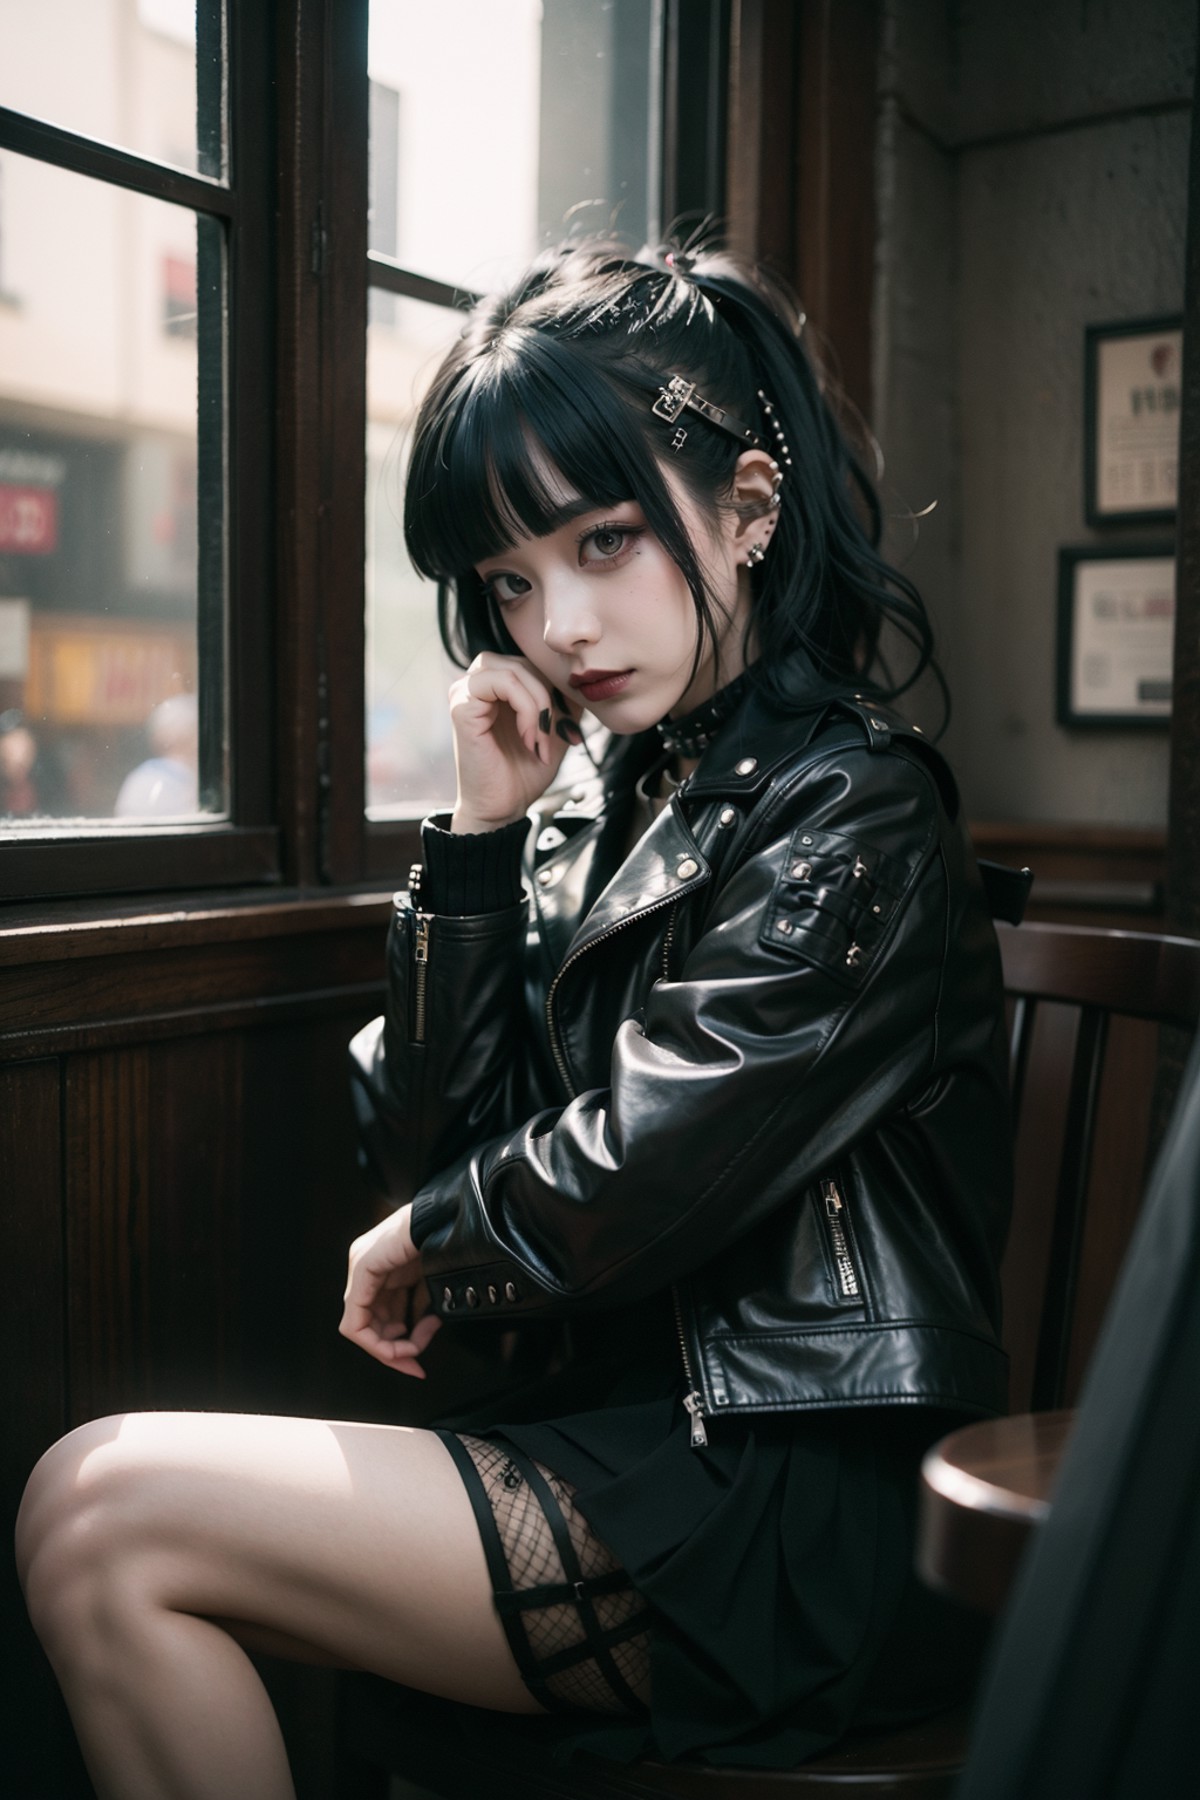 looking at viewer, A goth punk girl seated in a quaint cafe, clad in a studded leather jacket and tulle skirt, with bold m...